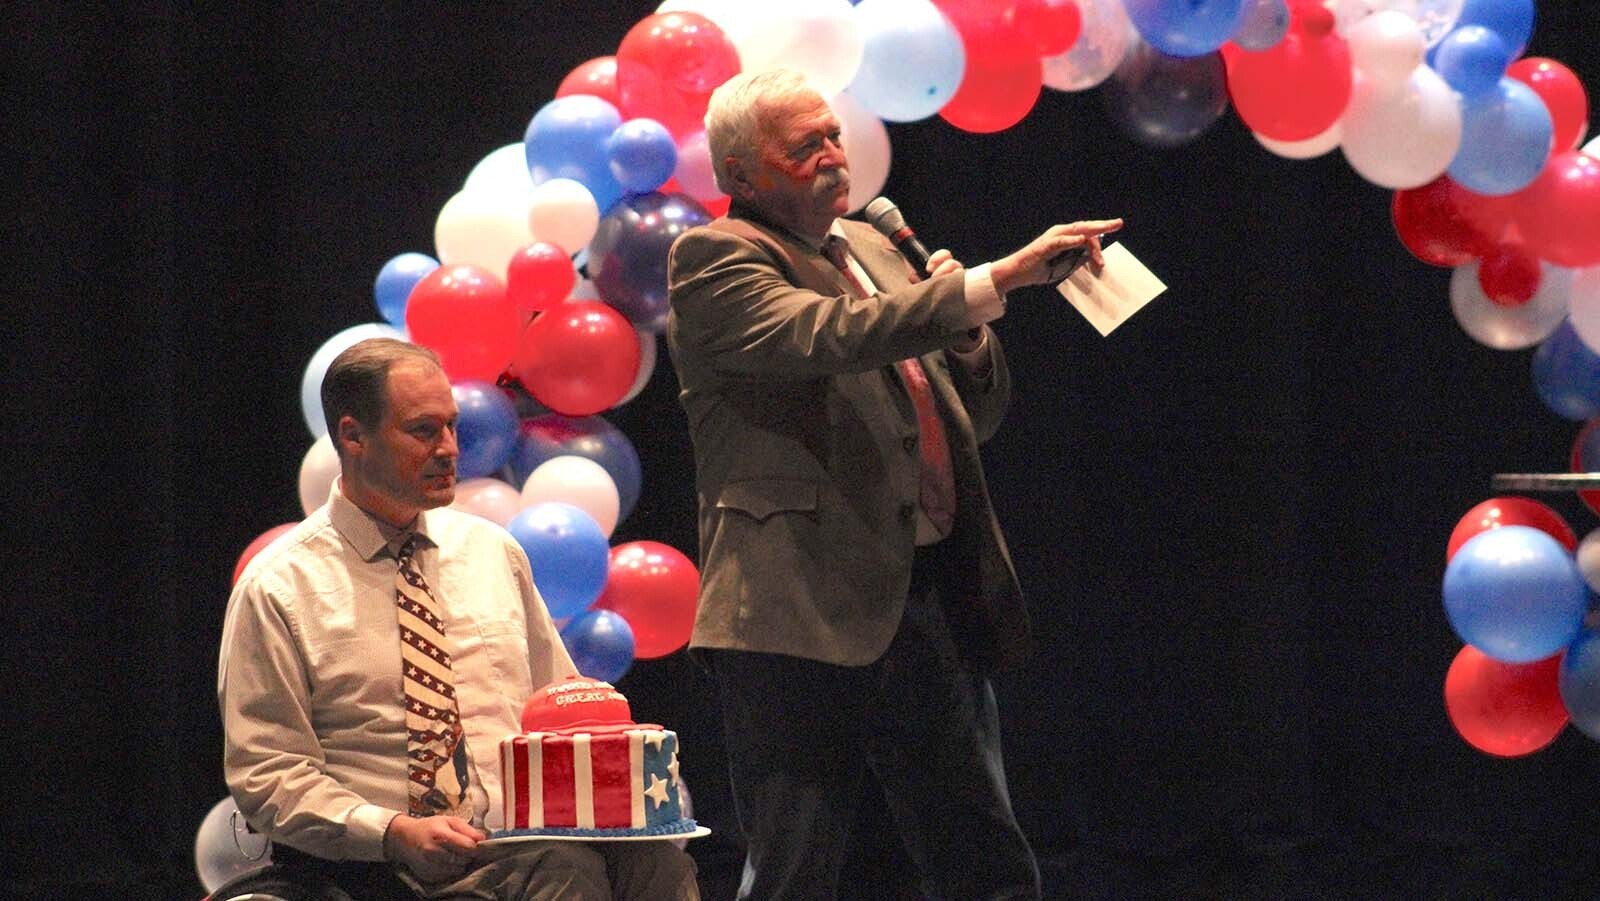 Campbell County GOP Chair Scott Clem, left, and Wyoming GOP Vice Chair David Holland auction off a MAGA cake that sold for $290.